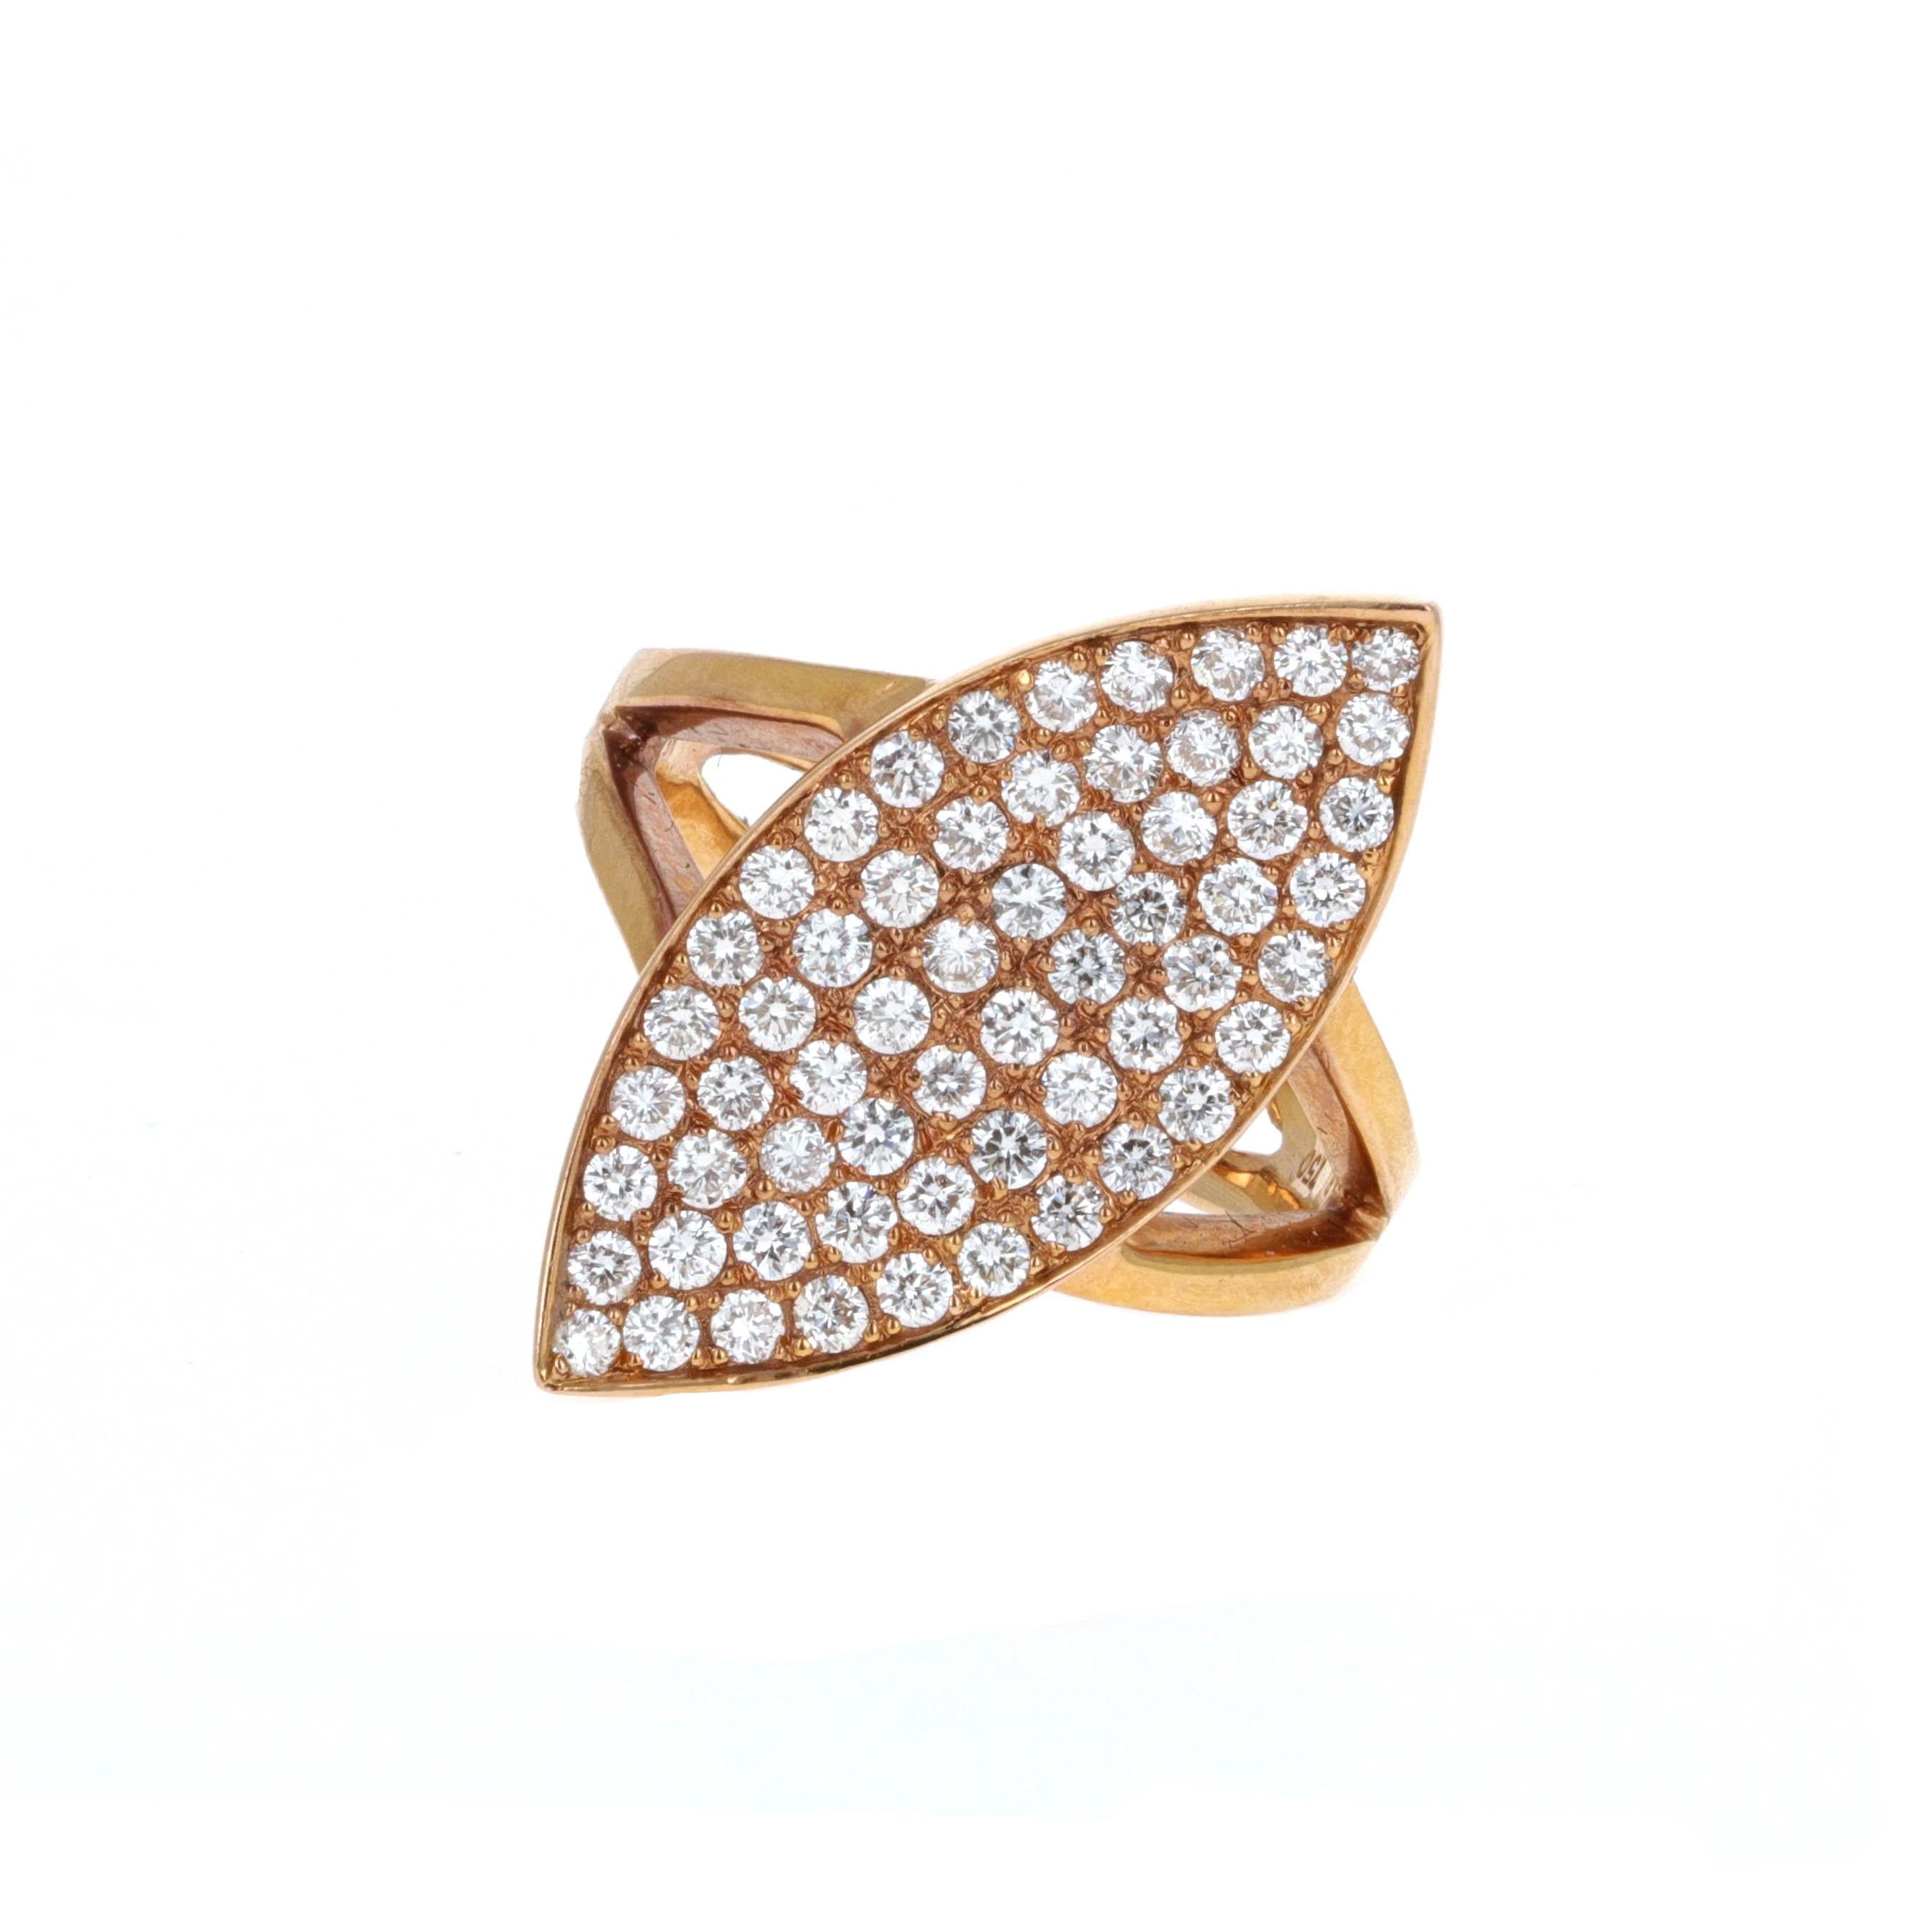 18 karat rose gold diamond pave cocktail ring. The ring is made with a split shank making it very fashionable and stylish. There are 60 round brilliant white diamonds weighing a total of 1.30 carats.

The ring is a size 7